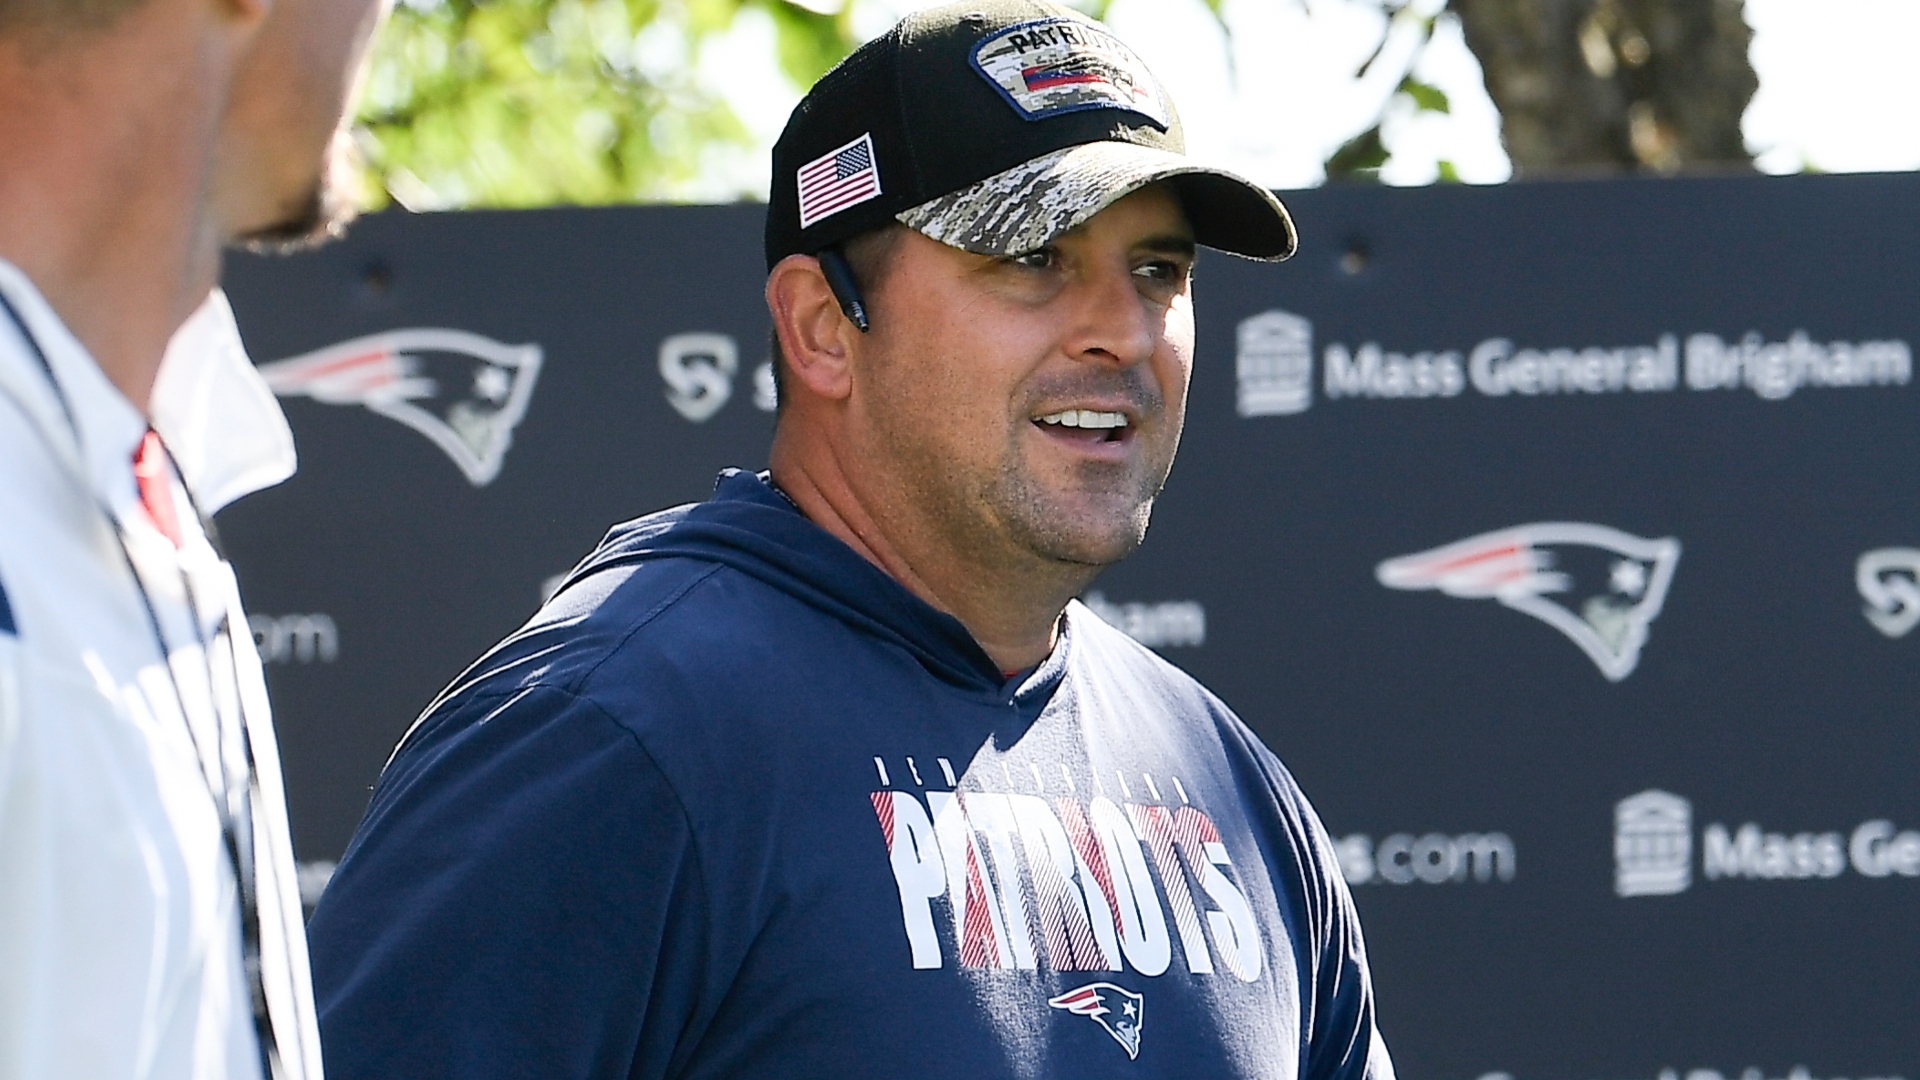 Ex-Giant Joe Judge officially named Patriots' assistant head coach